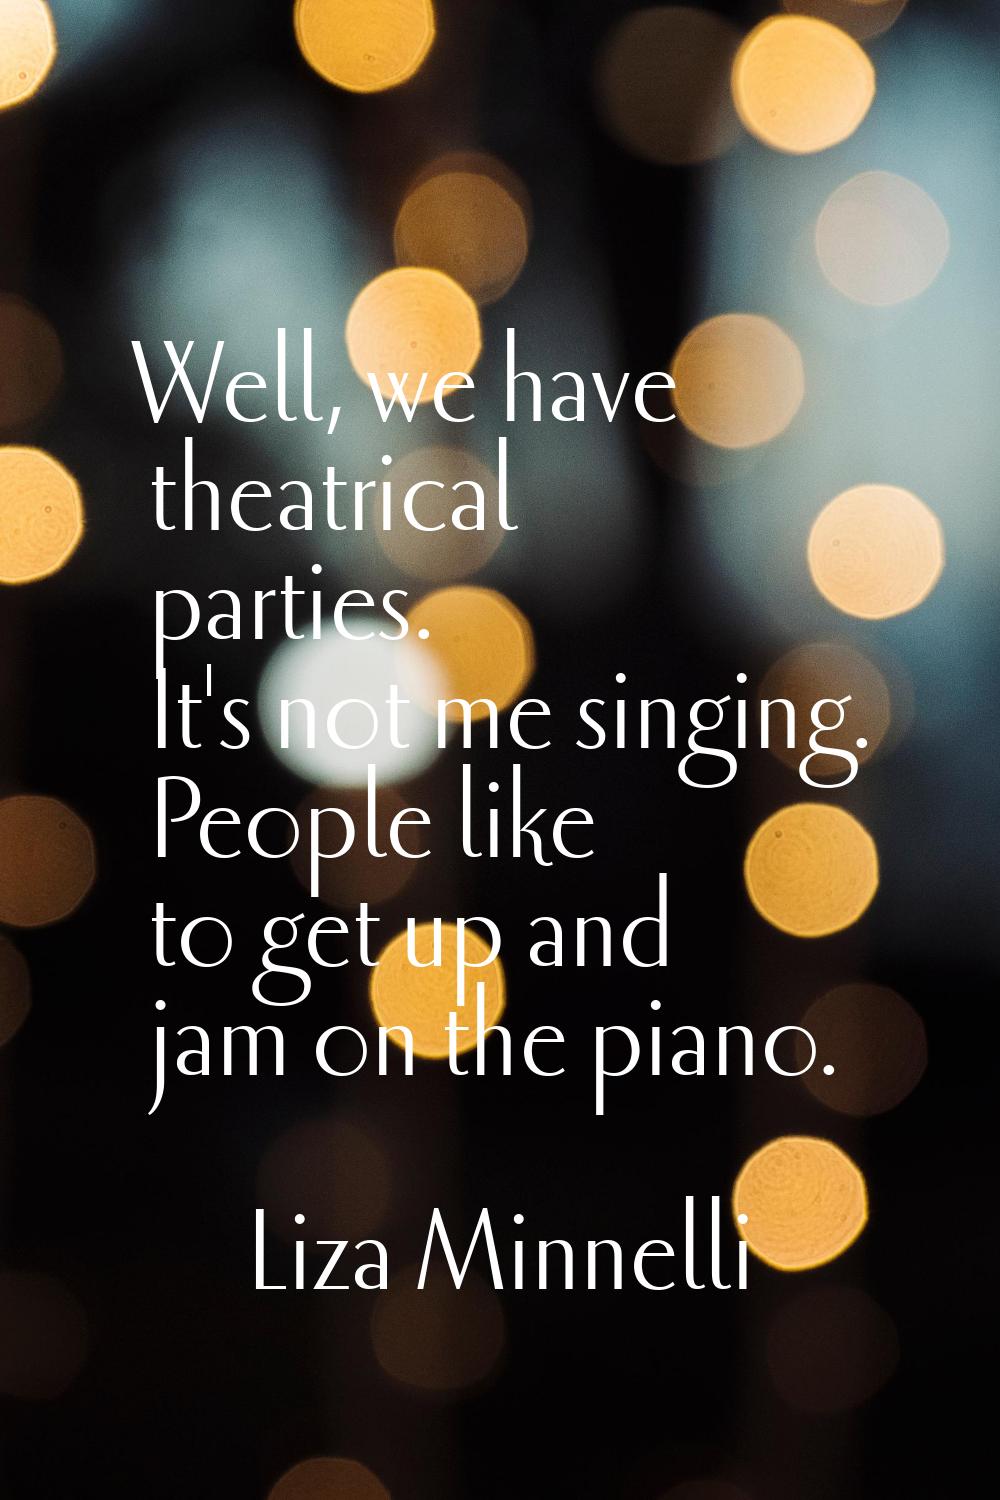 Well, we have theatrical parties. It's not me singing. People like to get up and jam on the piano.